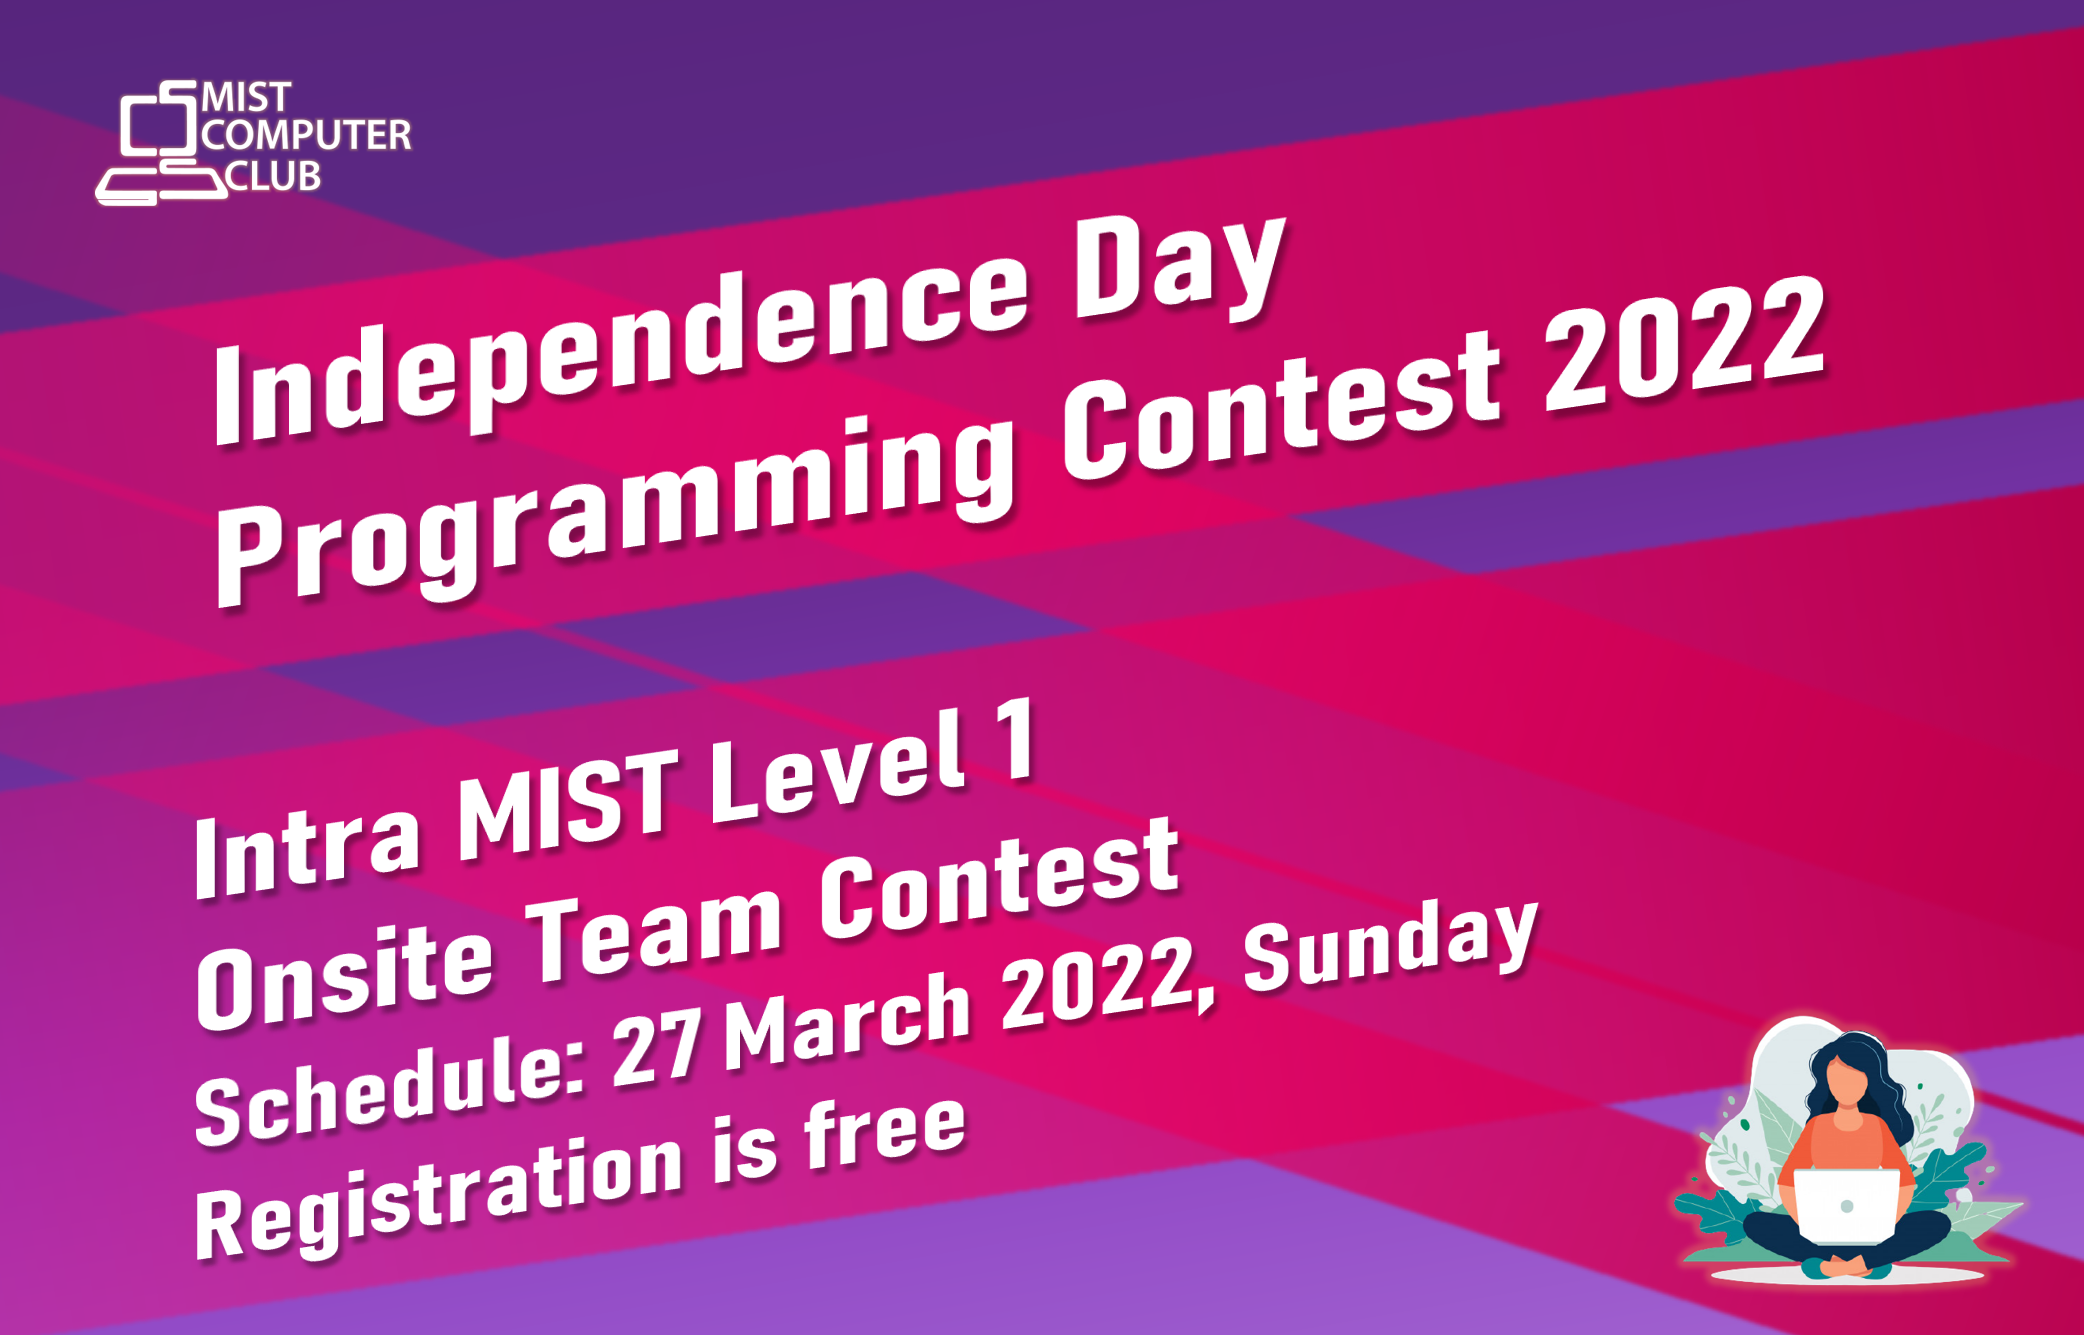 INDEPENDENCE DAY PROGRAMMING CONTEST-2022 ORGANIZED BY MIST COMPUTER CLUB